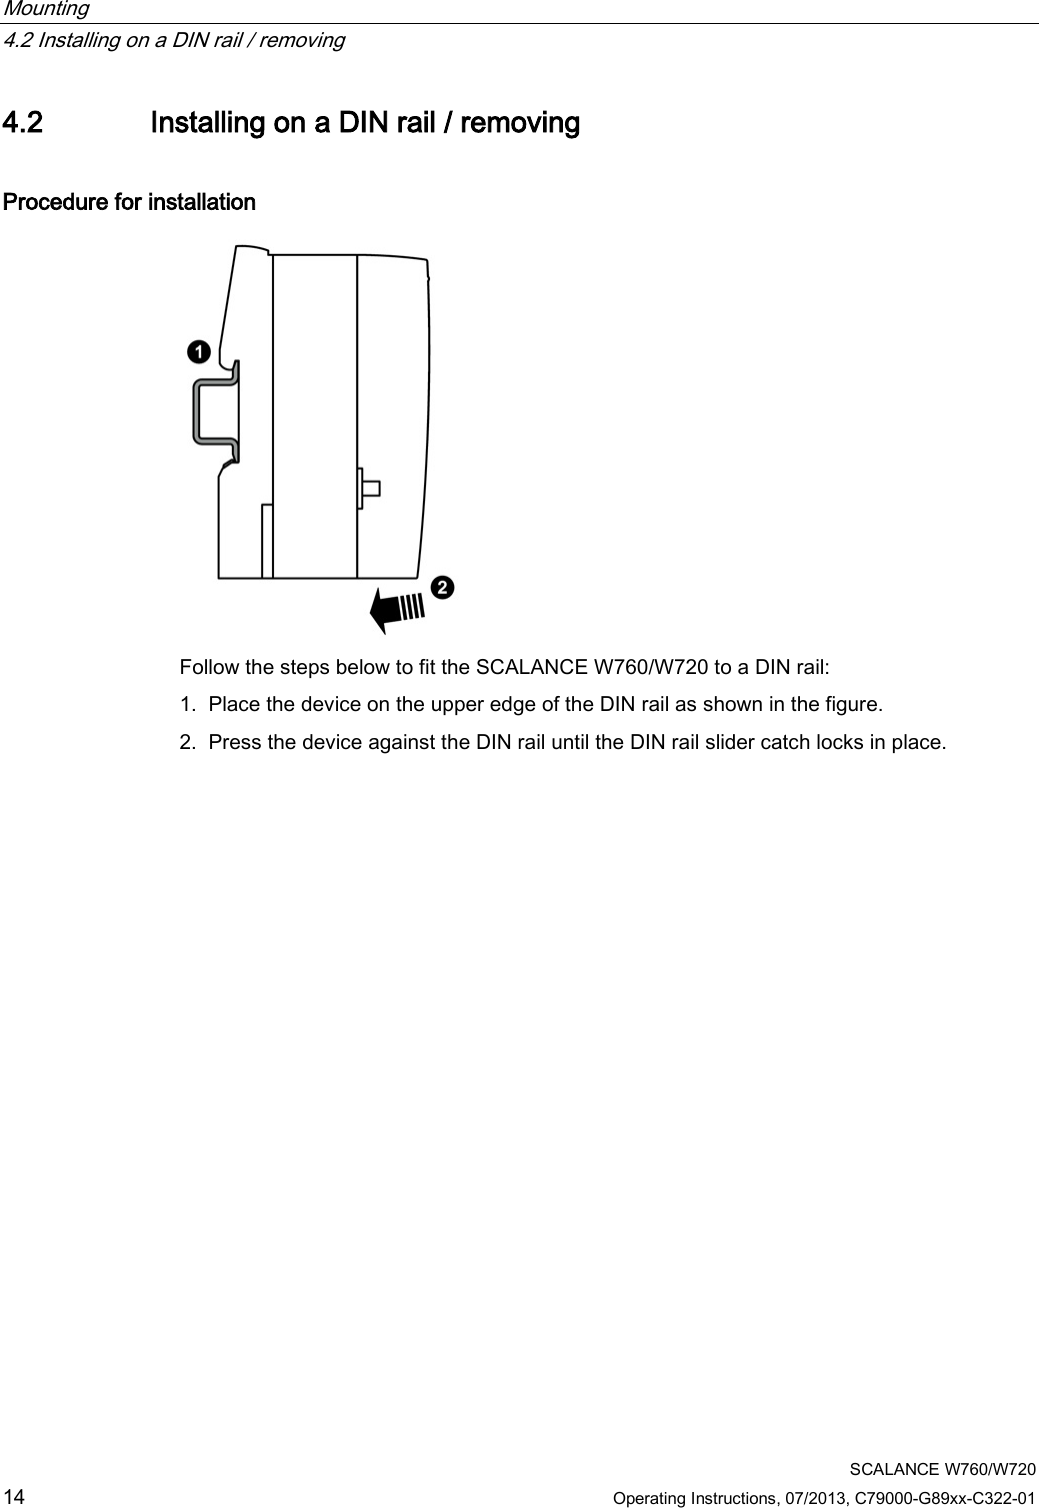 Mounting   4.2 Installing on a DIN rail / removing  SCALANCE W760/W720 14 Operating Instructions, 07/2013, C79000-G89xx-C322-01 4.2 Installing on a DIN rail / removing Procedure for installation  Follow the steps below to fit the SCALANCE W760/W720 to a DIN rail: 1. Place the device on the upper edge of the DIN rail as shown in the figure. 2. Press the device against the DIN rail until the DIN rail slider catch locks in place. 